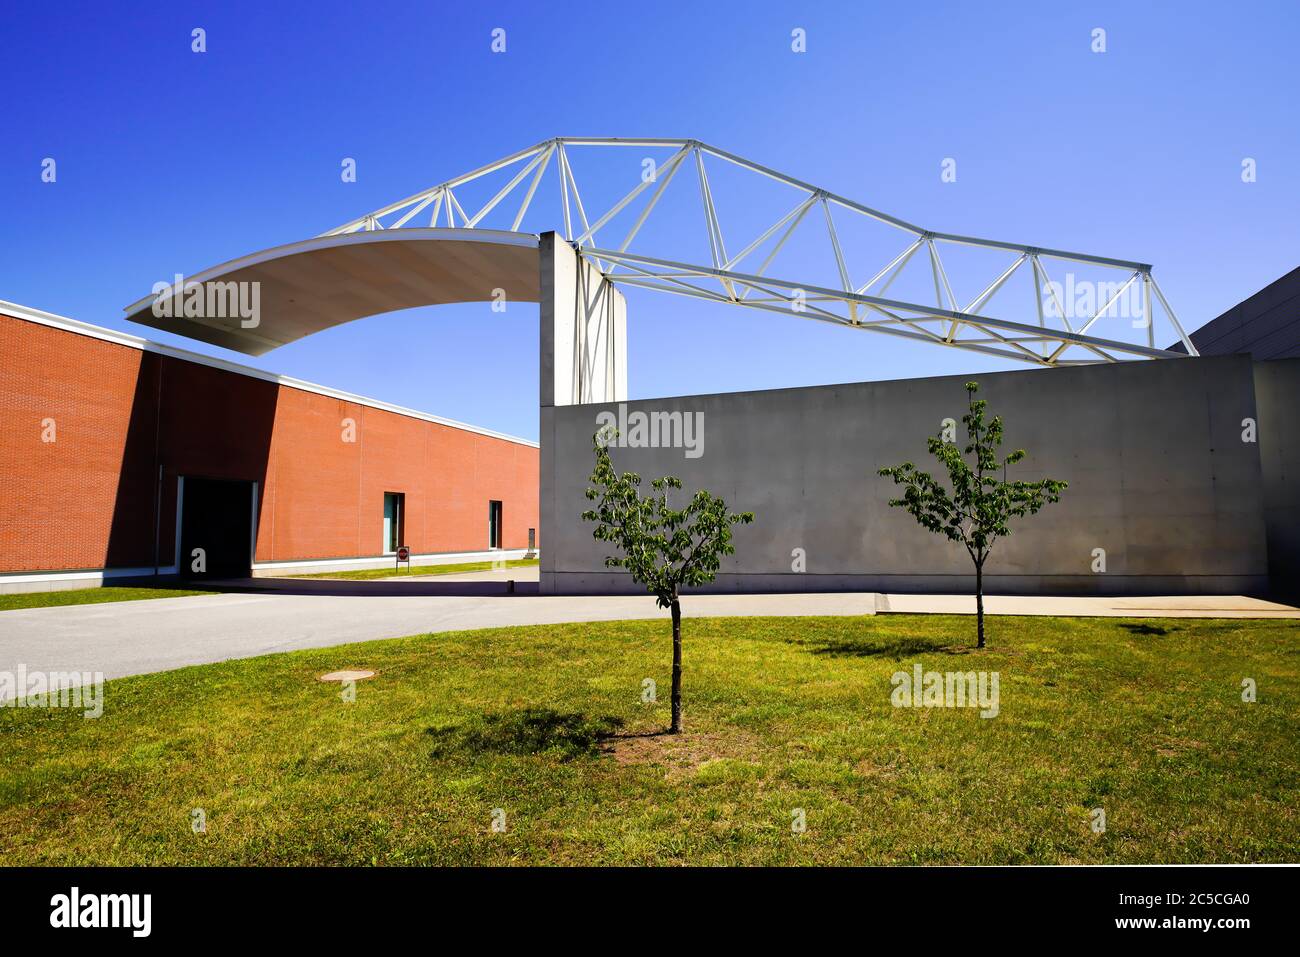 Vitra factory buildings and passage by architect Alvaro Siza, Weil am Rhein, Germany. Stock Photo